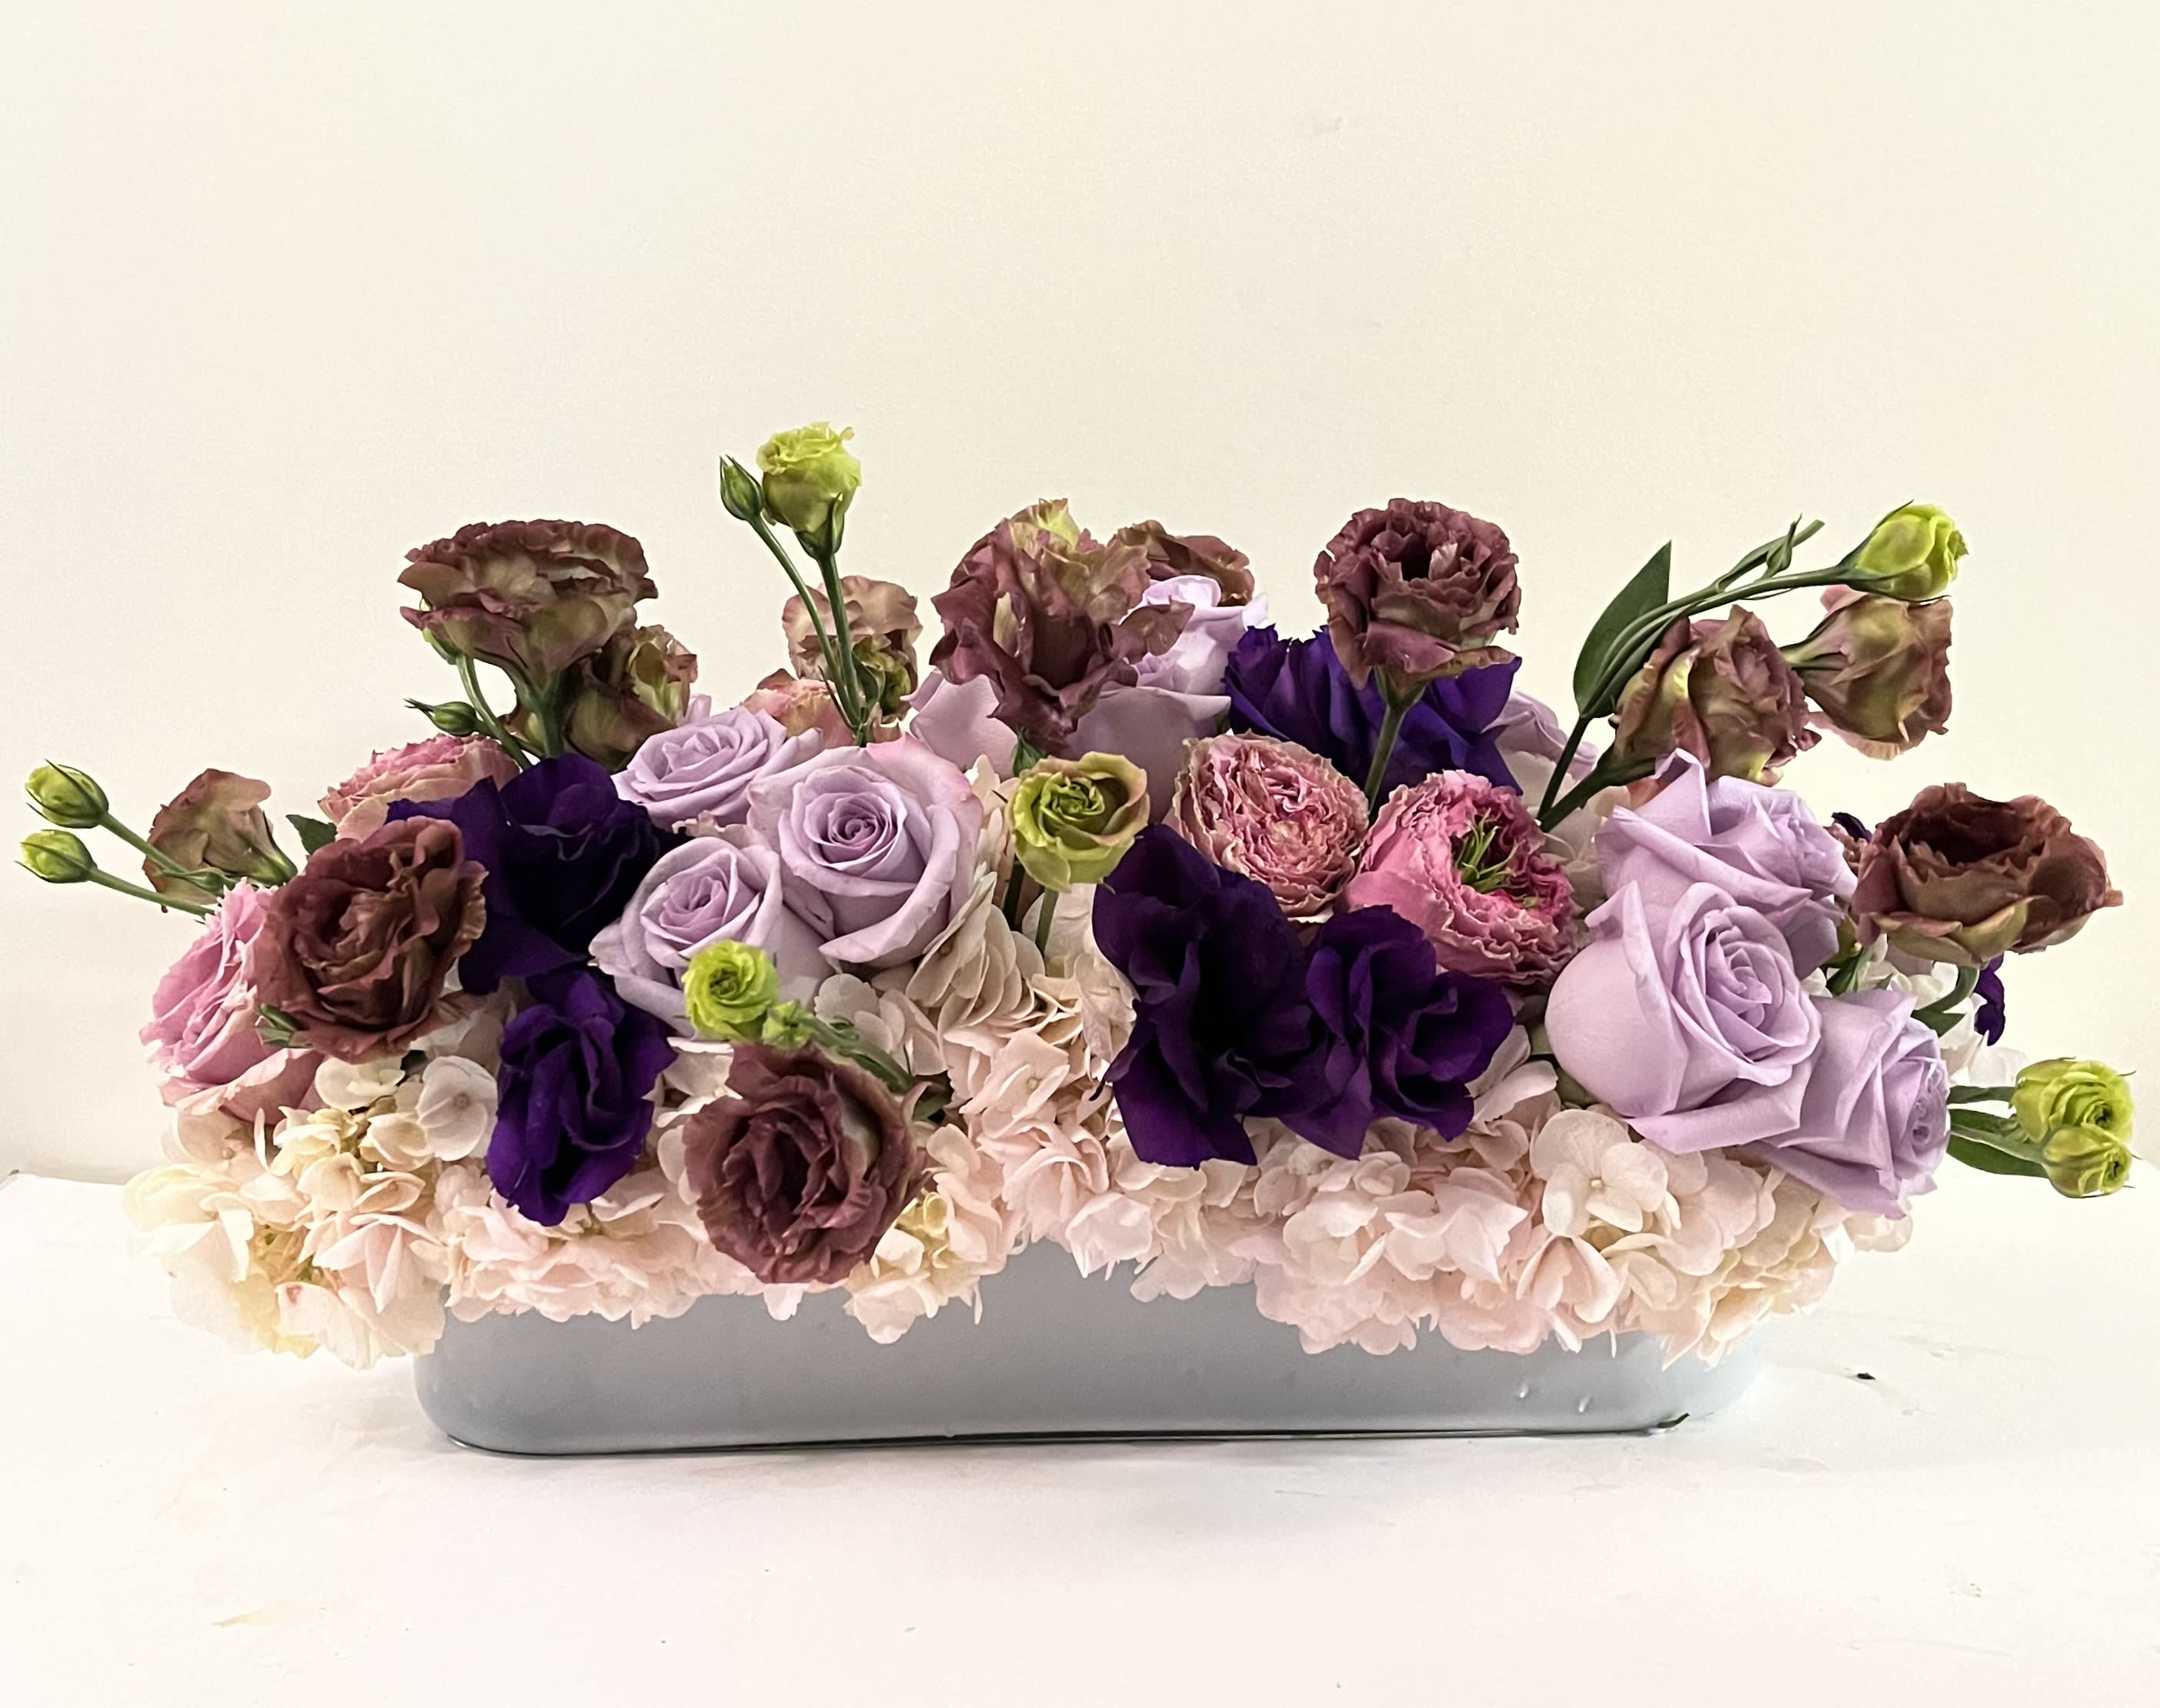 Soft &amp; Gentle #EF214 - Combination of amazing colors put together in a white low &amp; long glass vase with Soft Pink or White Hydrangea, Lavander Roses, Brown  &amp; Purple Lishanth's, medium Pink Roses.  A Very delicate Arrangement appropriate for any occasion   